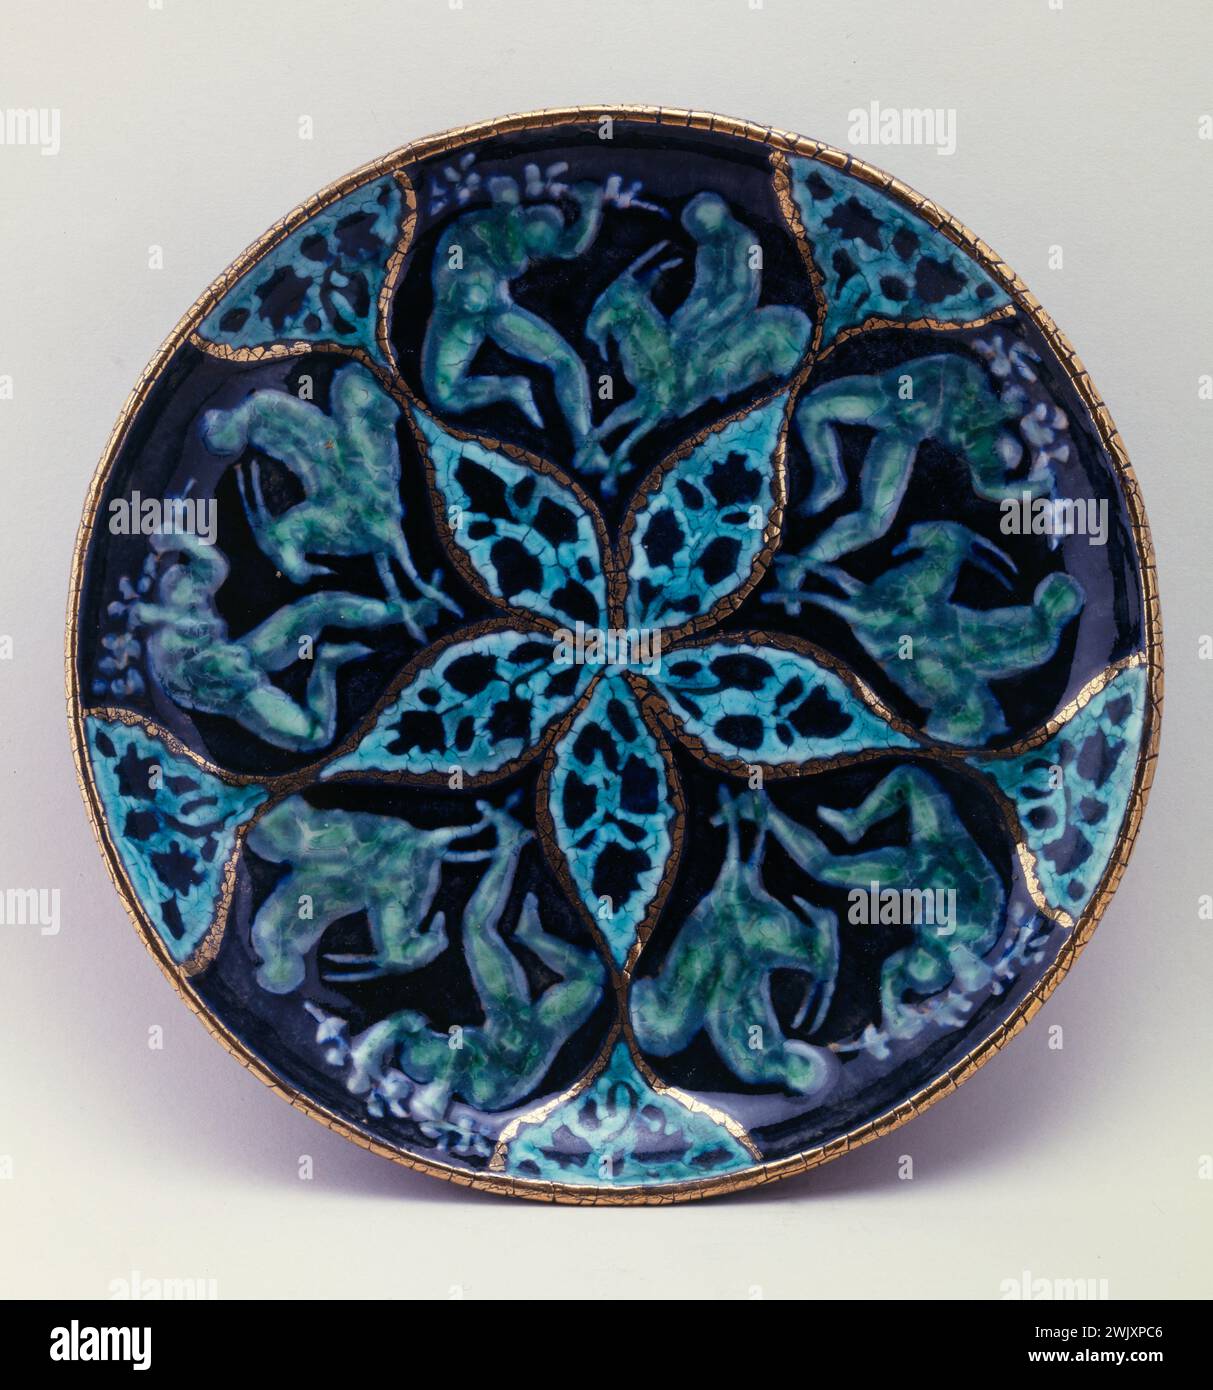 André Metthey (1871-1920). Plate. Earthenware. Museum of Fine Arts of the City of Paris, Petit Palais. 79583-28 Art Menager, Faience, Crockery, XIXth 19th 19th 19 19th 19th century, plate Stock Photo